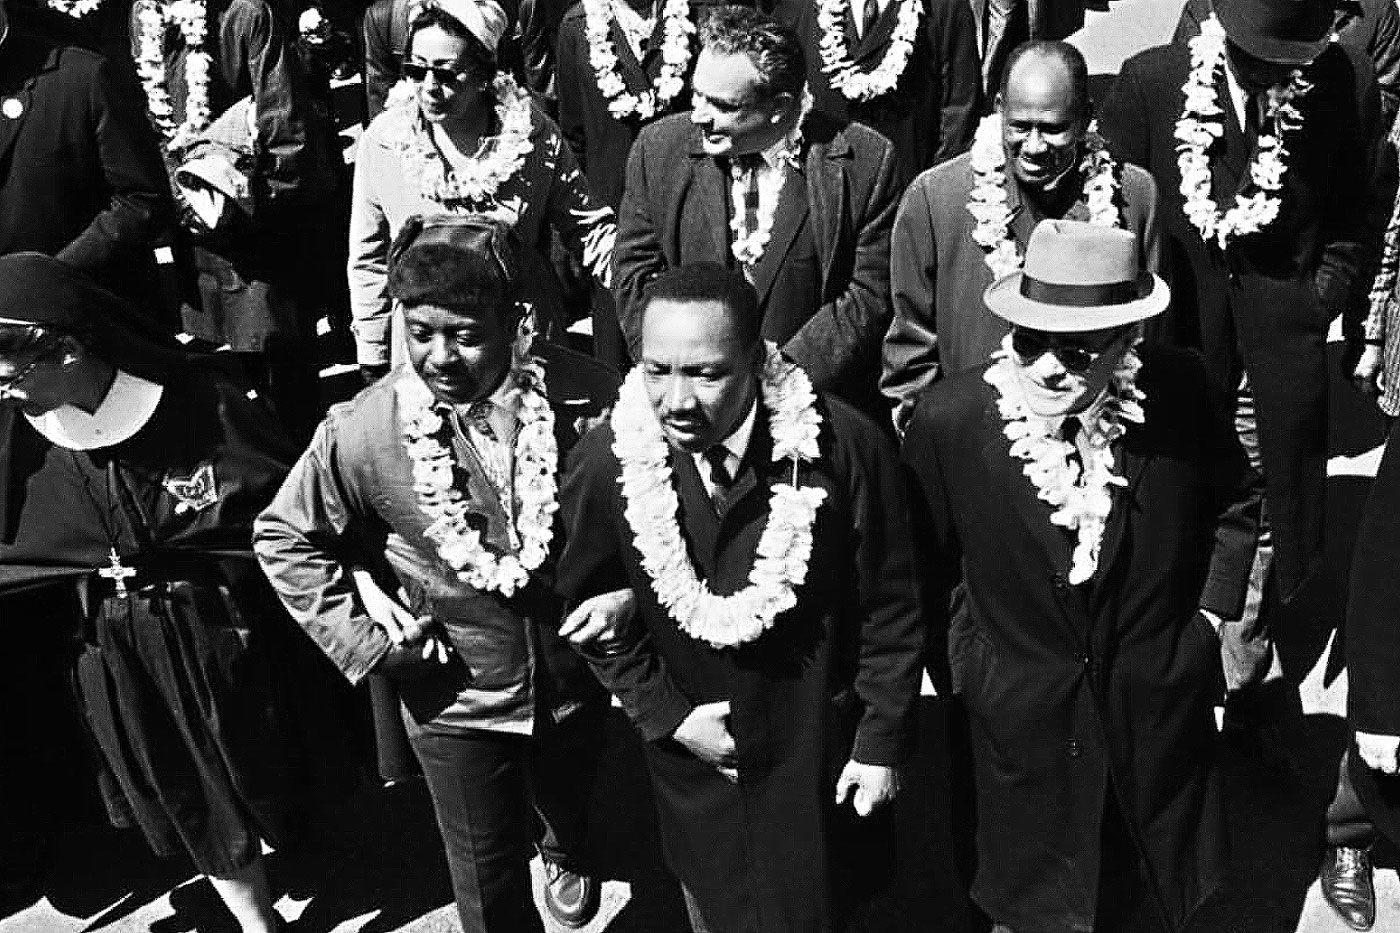 group of people marching with leis